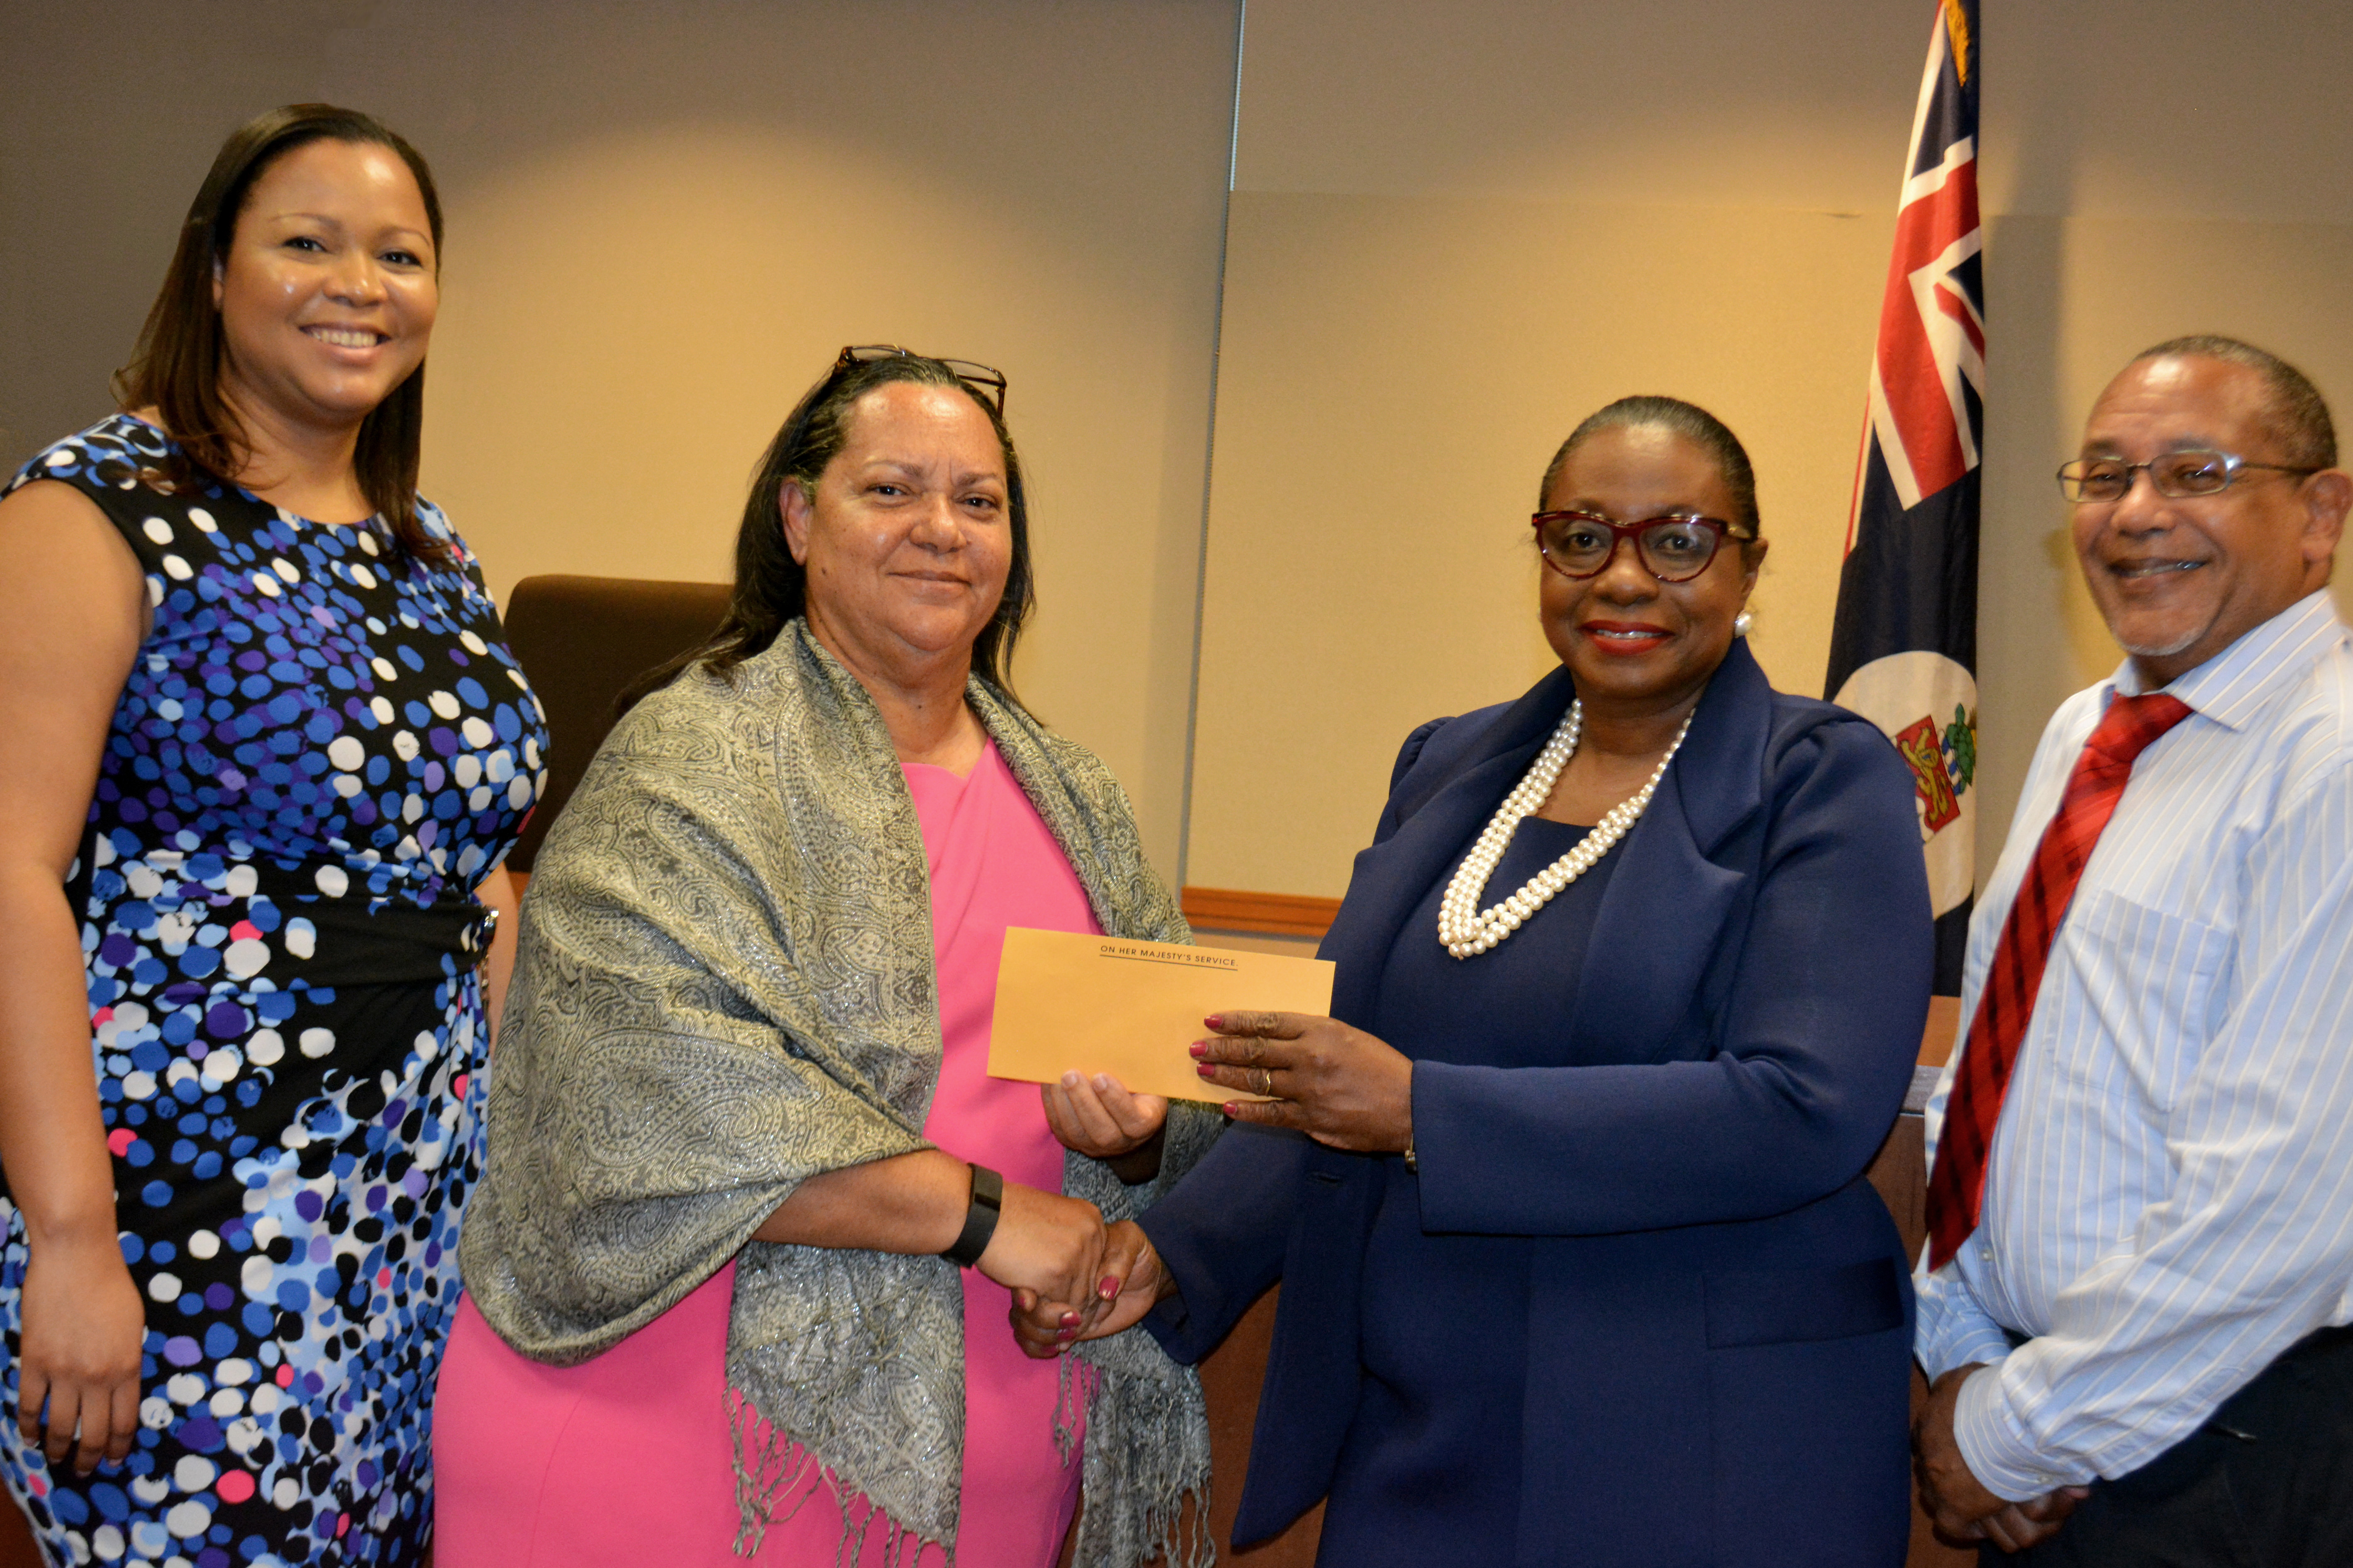 Ministry of Education UWI Cheque Presentation